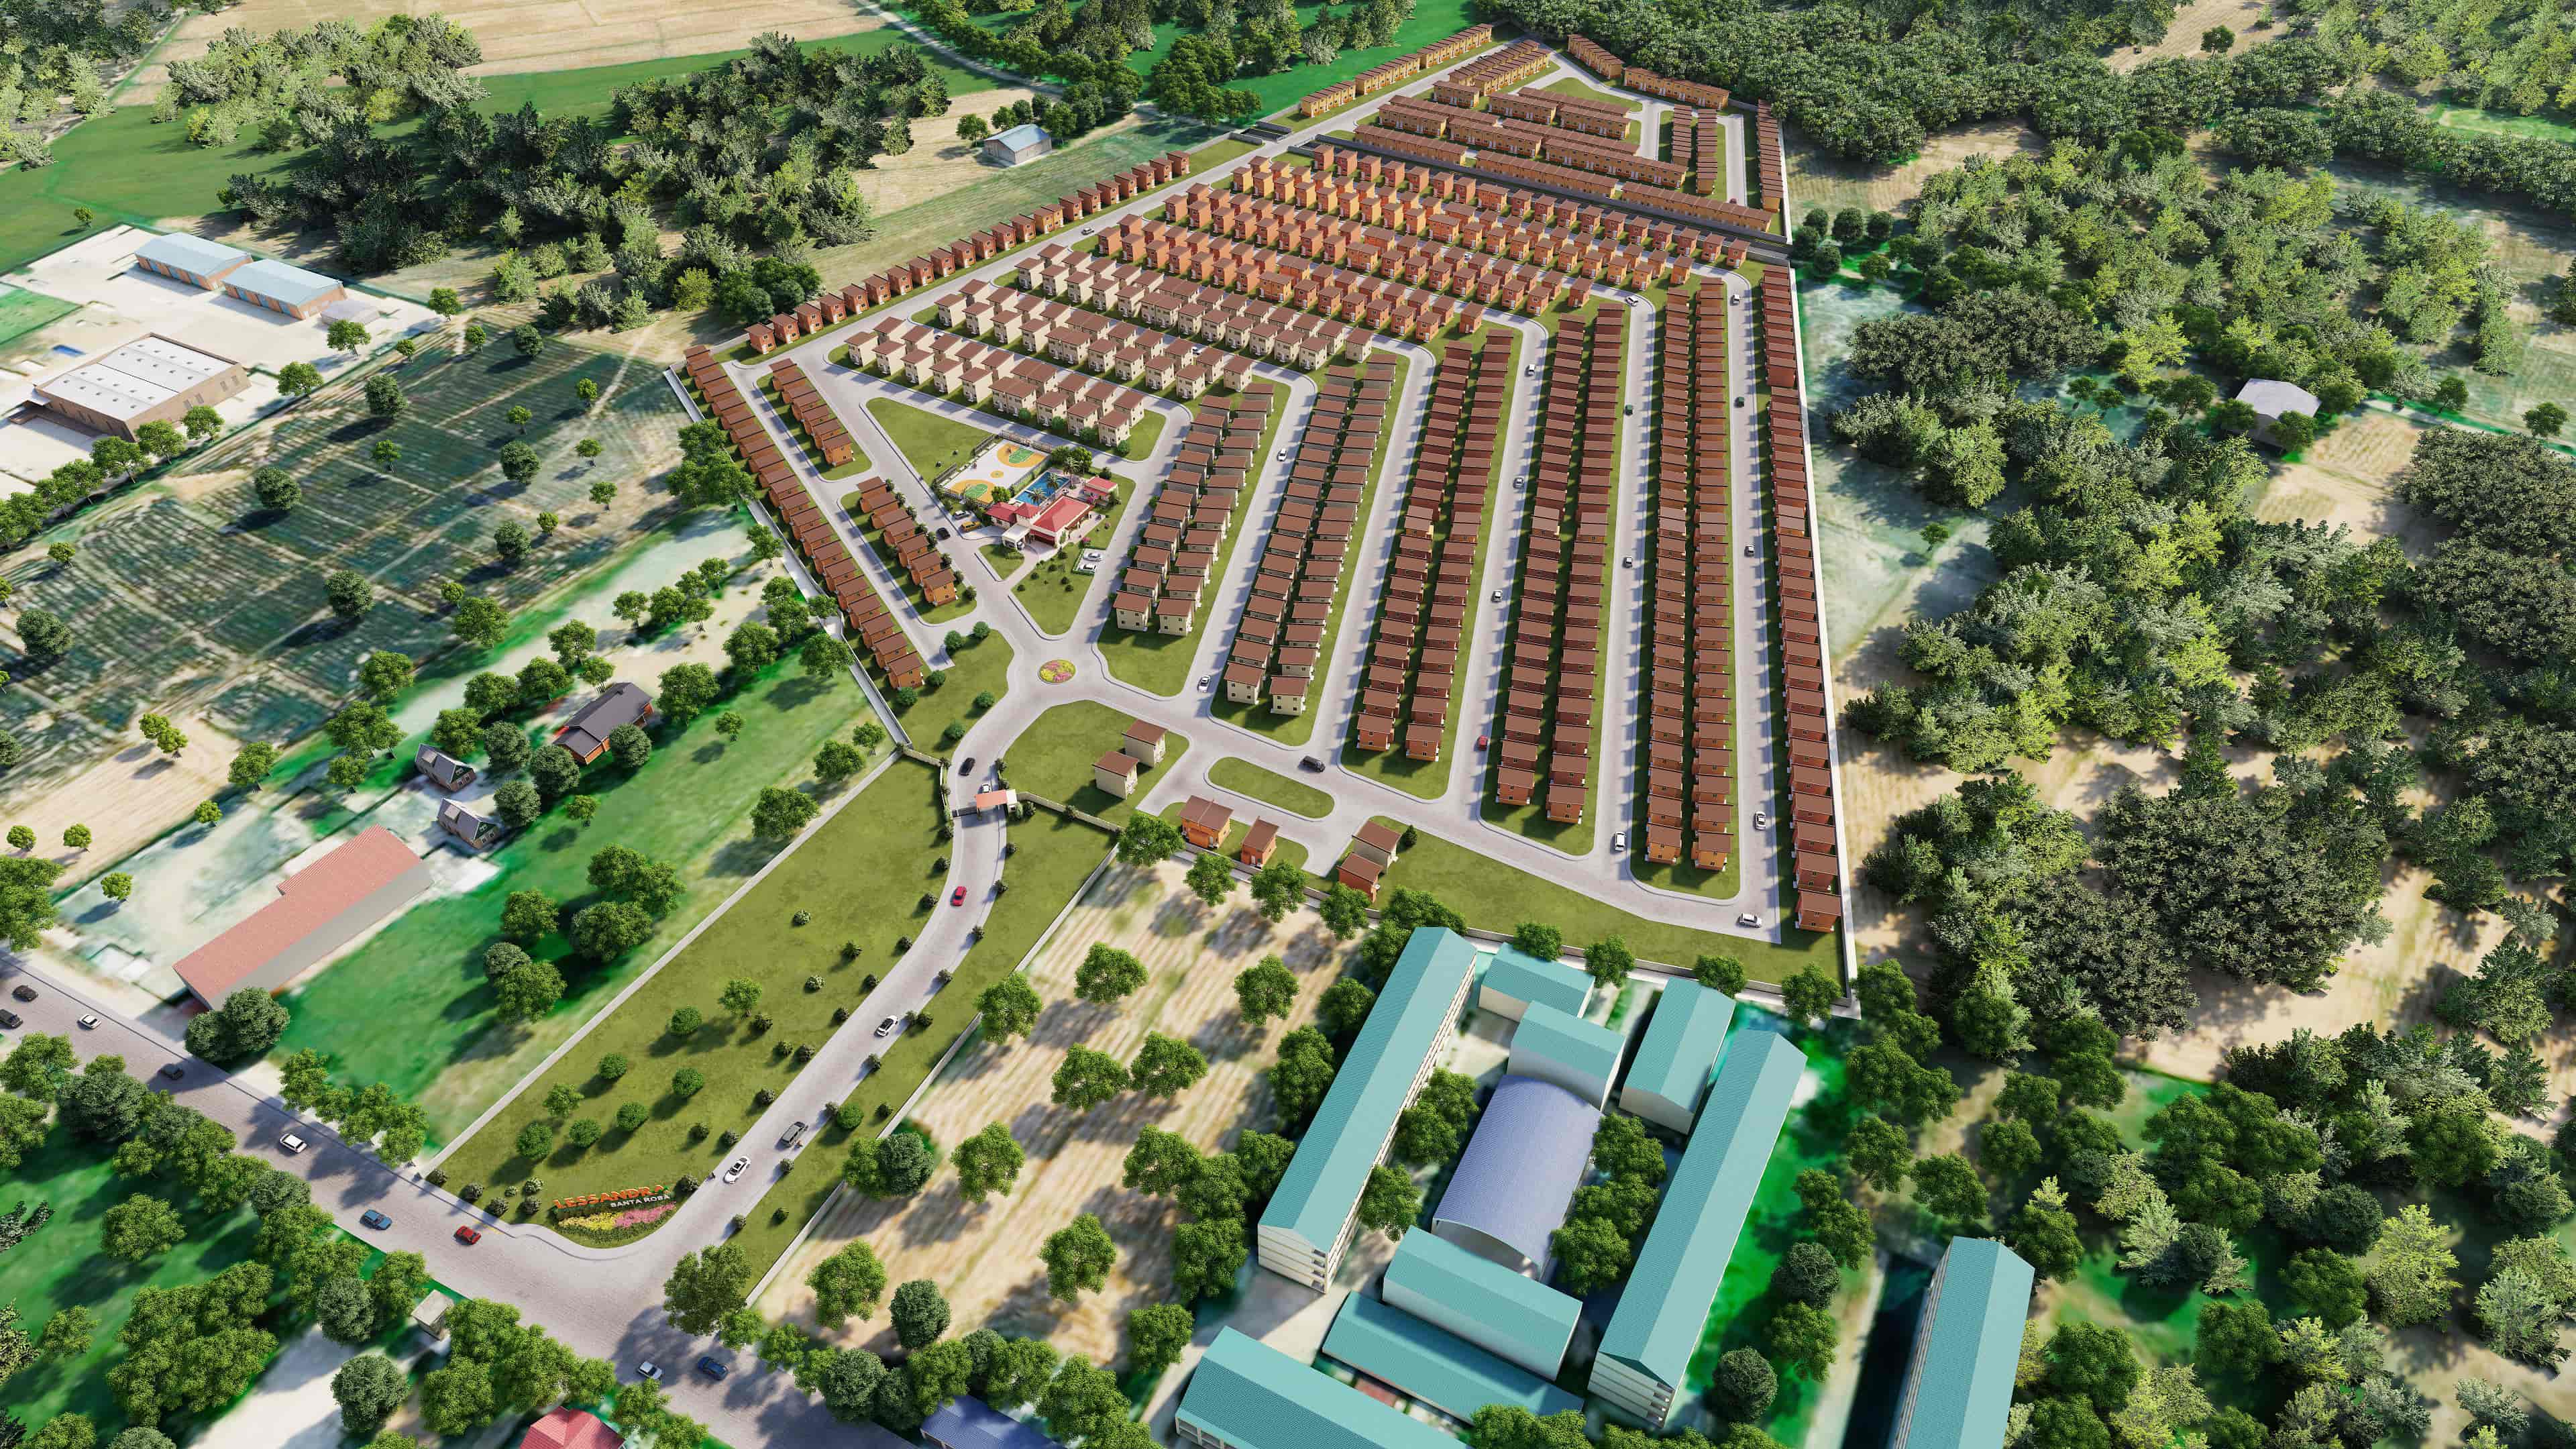 An Aerial Perspective of the Lessandra Santa Rosa Site Plan